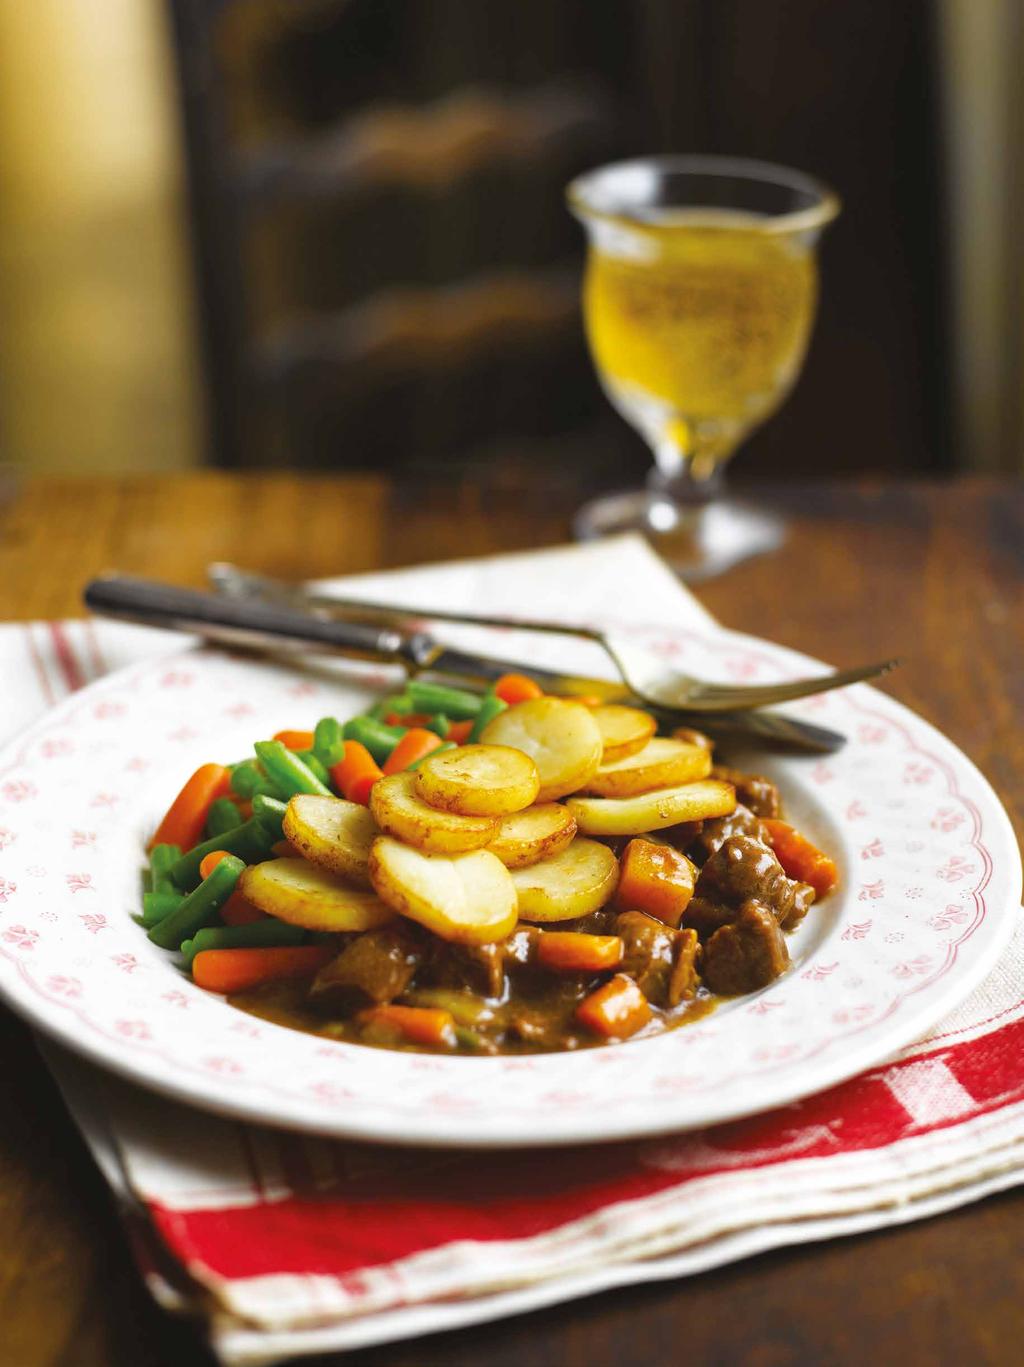 Steak & Kidney Pie 211 BEEF Steak and kidney in a rich gravy with a short-crust pastry top, served with